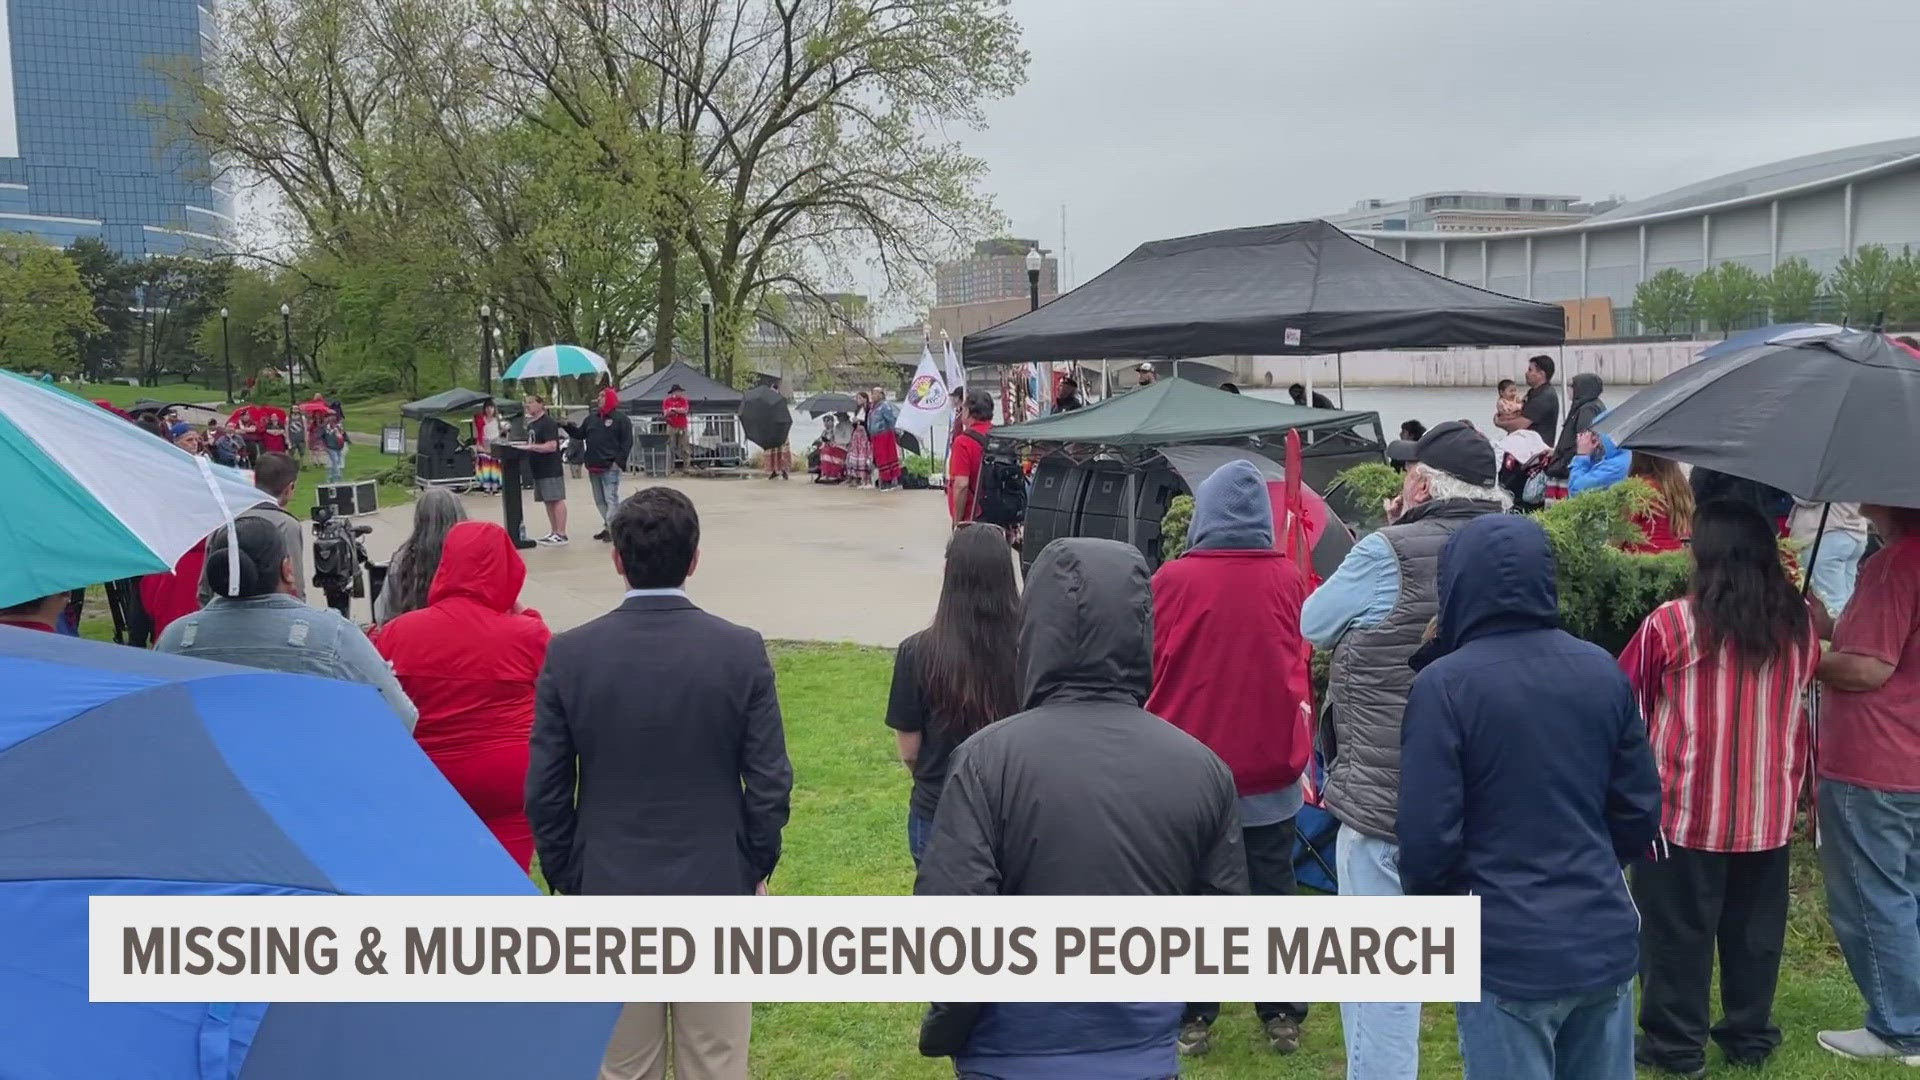 Sunday is Missing and Murdered Indigenous Persons (MMIP) Awareness Day.